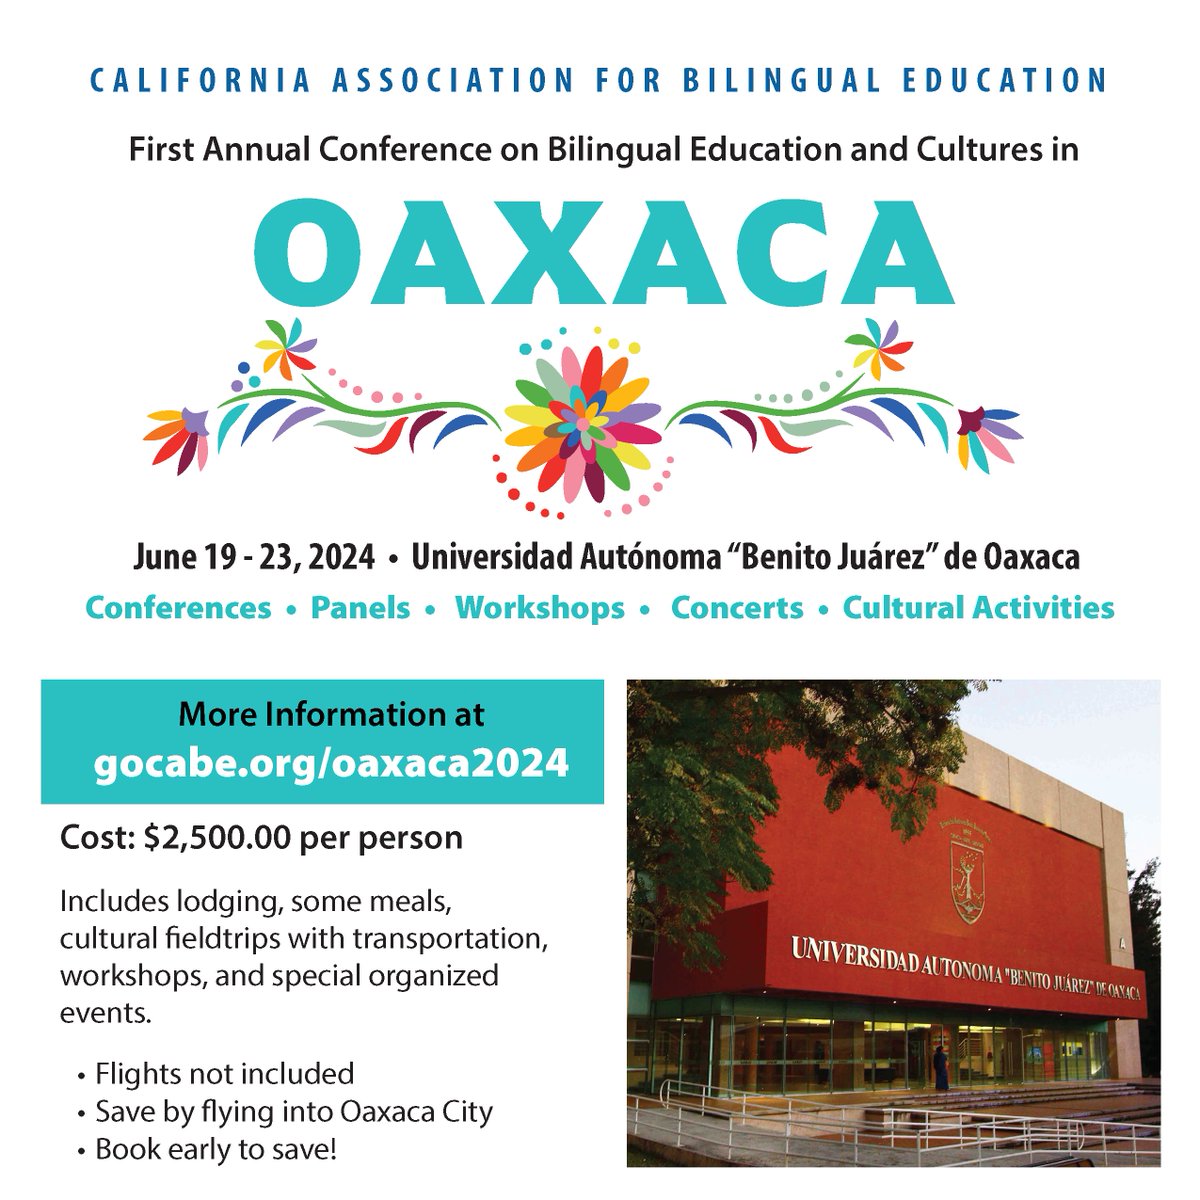 Register for our First Annual Conference on Bilingual Education & Cultures in Oaxaca! For more information: gocabe.org/oaxaca2024/ #cabe #cabeconference #bilingualeducation #bilingualeducationresources #cultureconference #mexico #mexicoconference #oaxaca